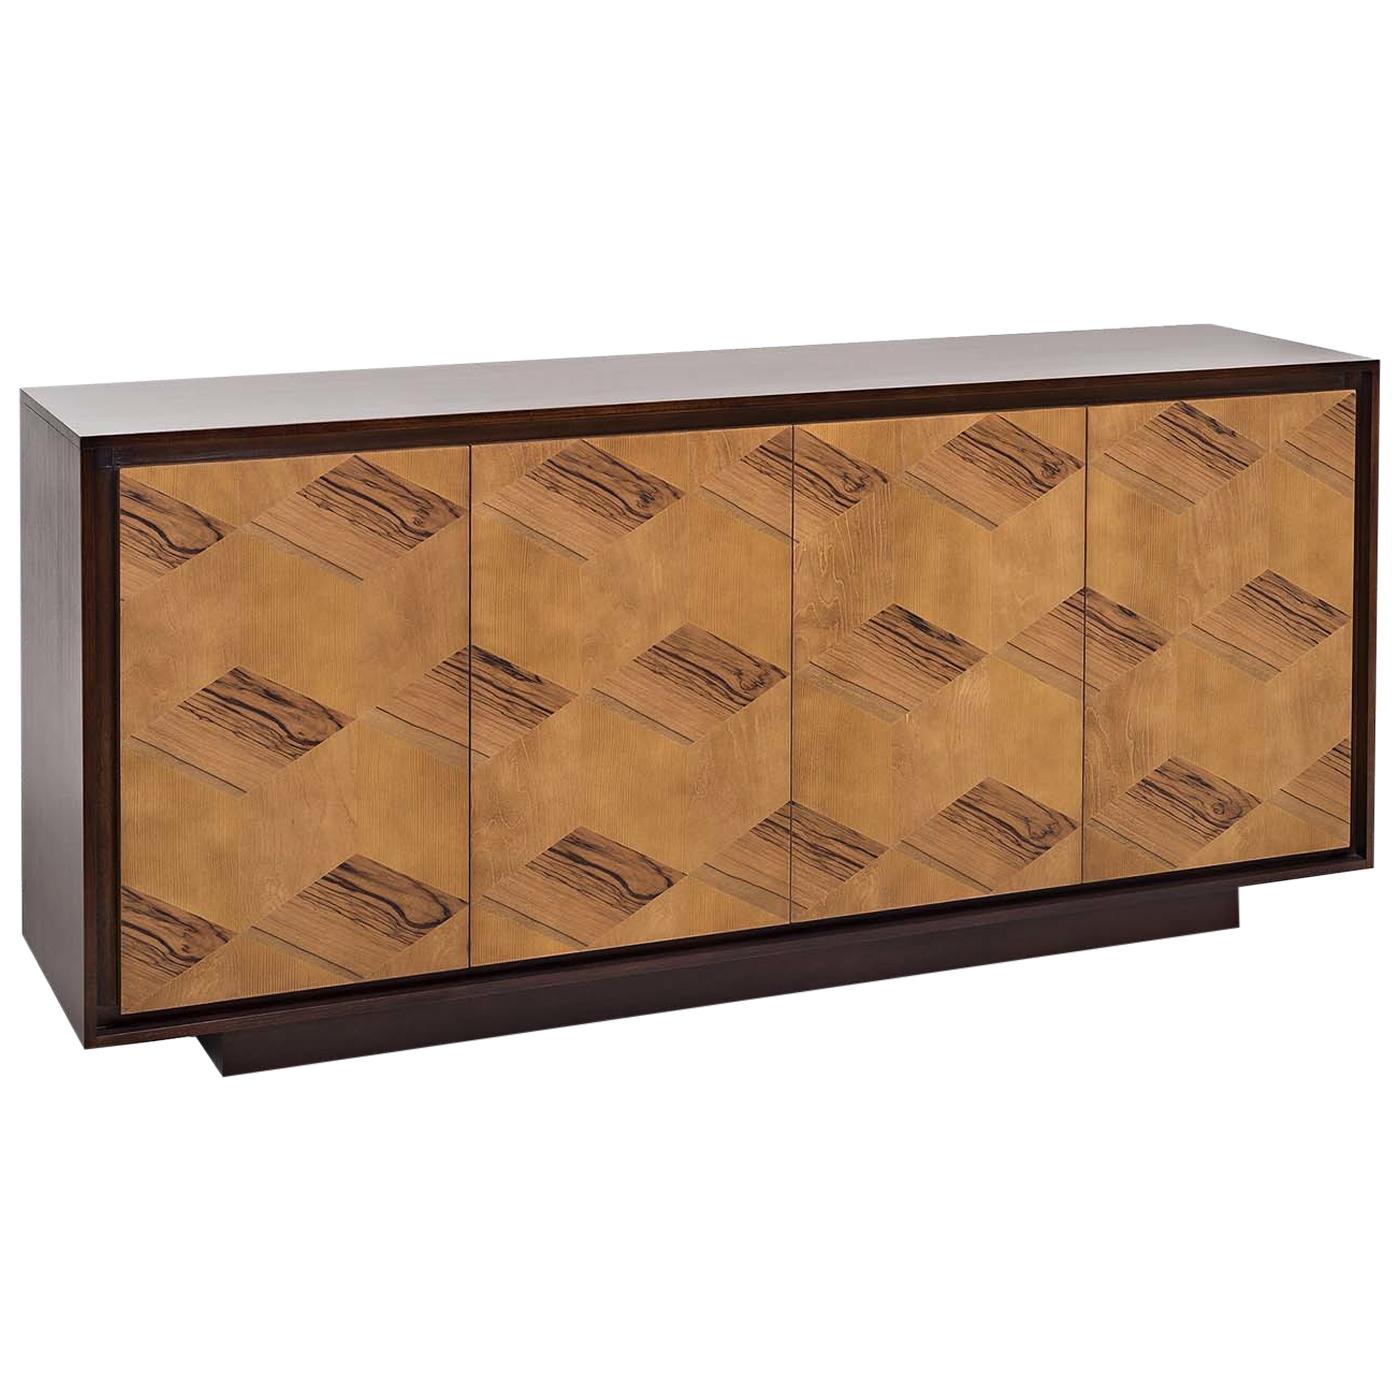 Buffet Sideboard by Buying & Design